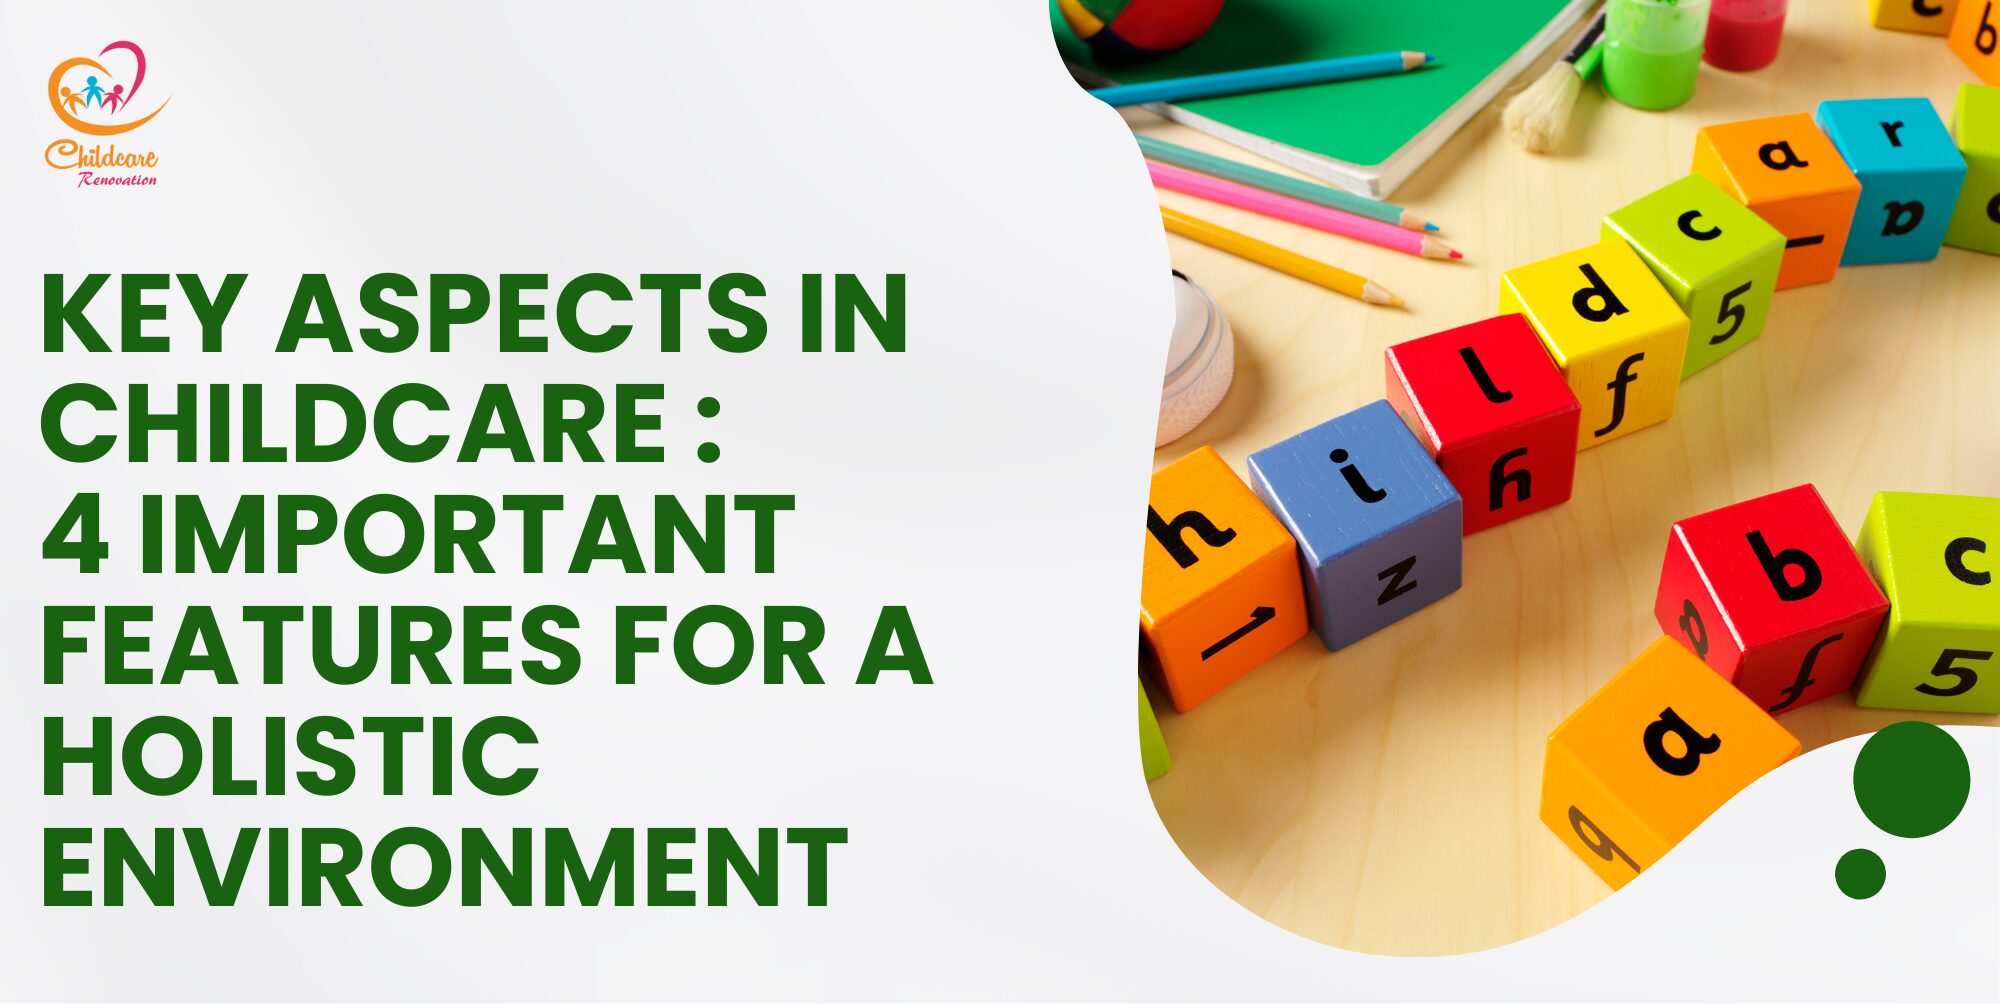 Key Aspects In Childcare : 4 Important Features For A Holistic Environment